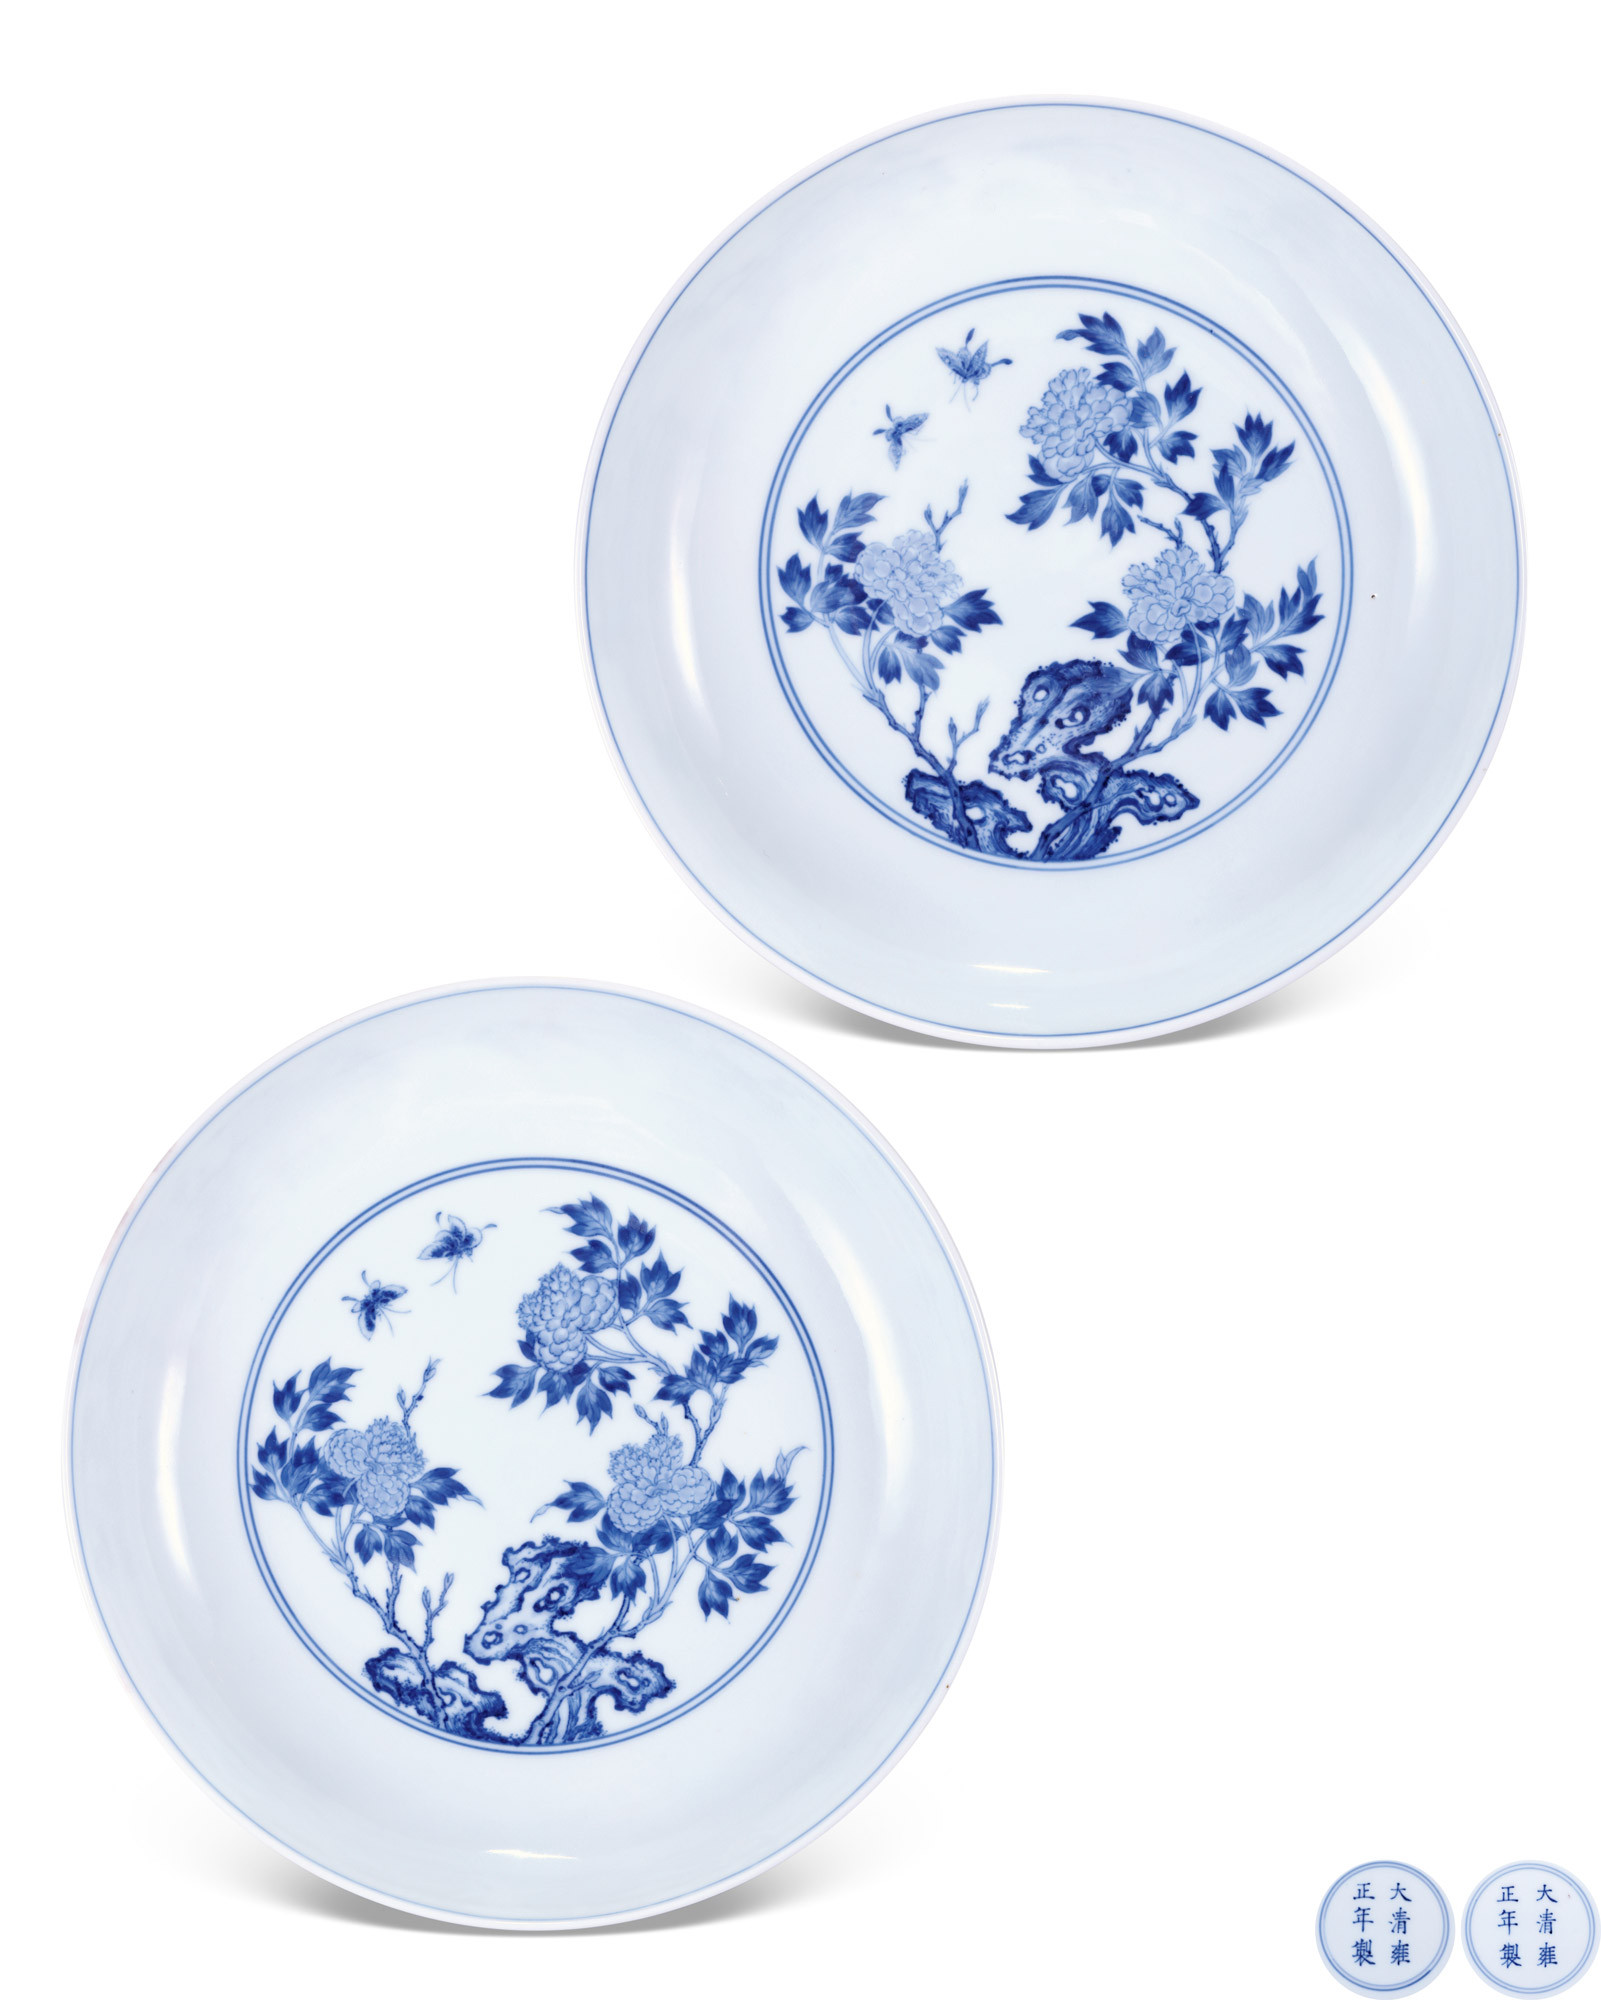 A RARE PAIR OF BLUE AND WHITE‘FLORAL’DISHES